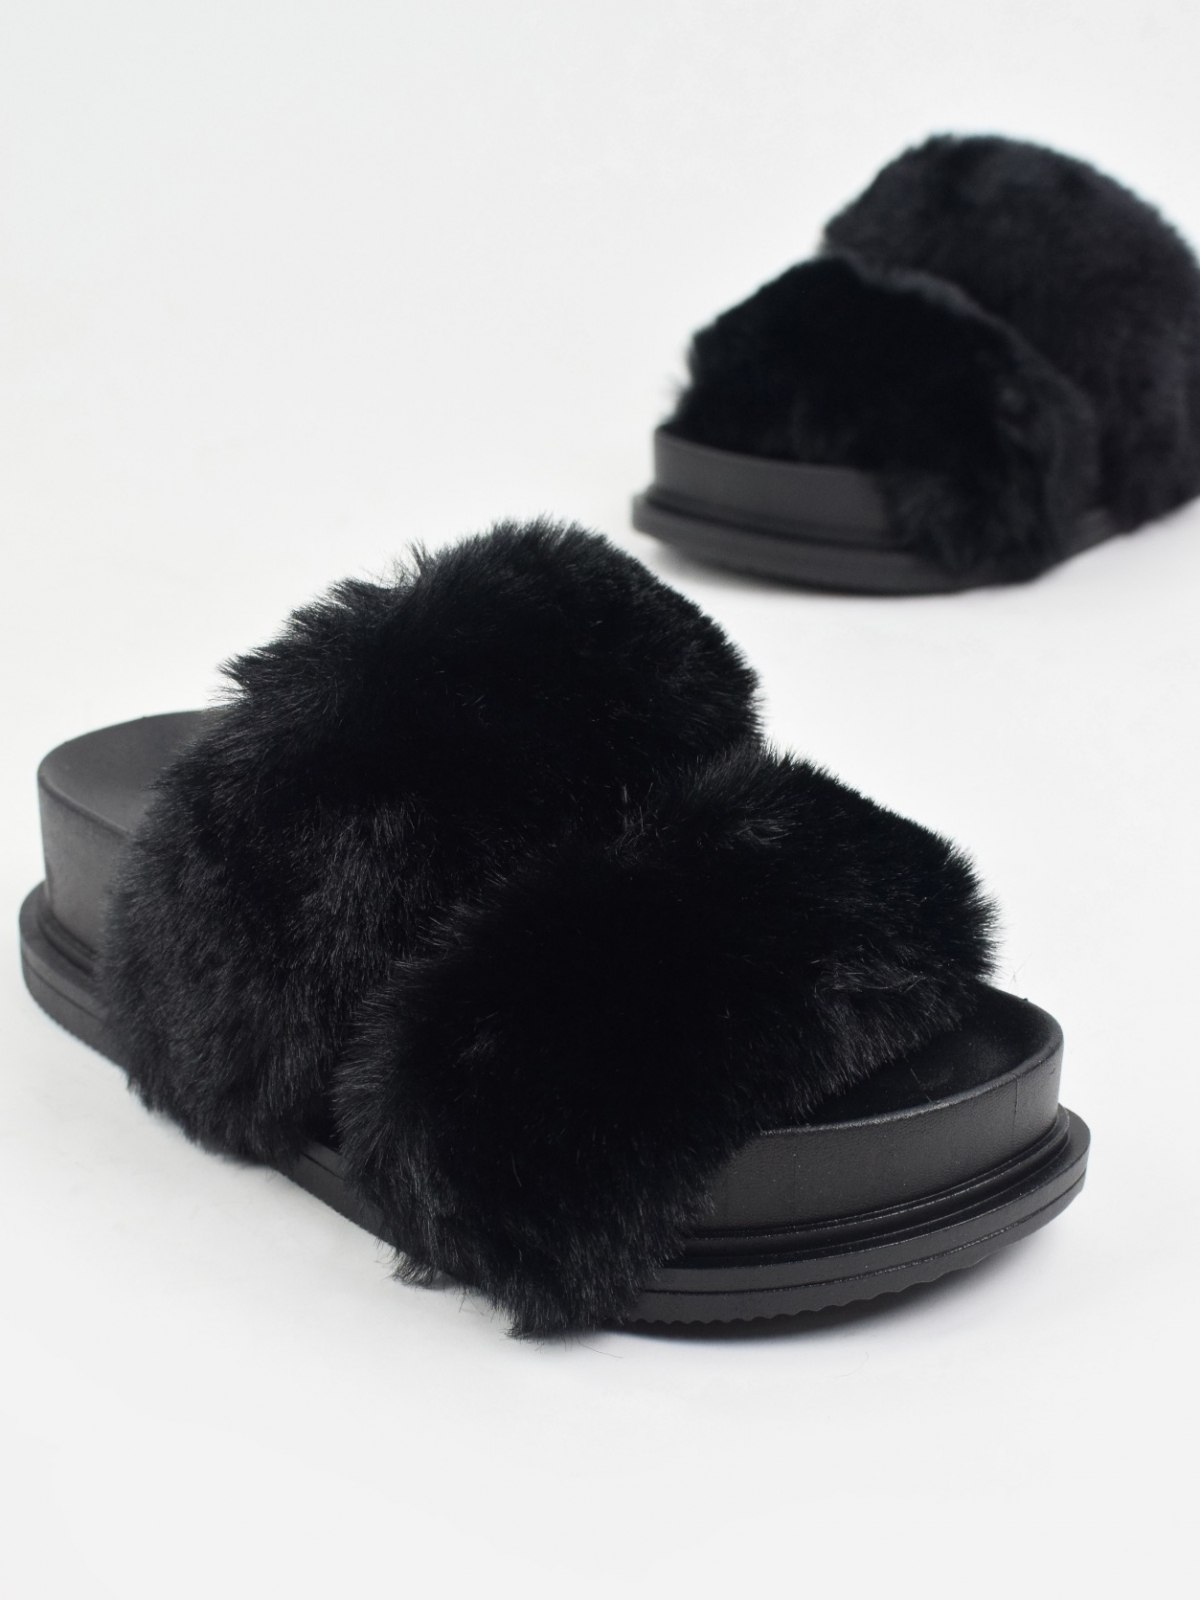 Oversize style slippers with fur in black